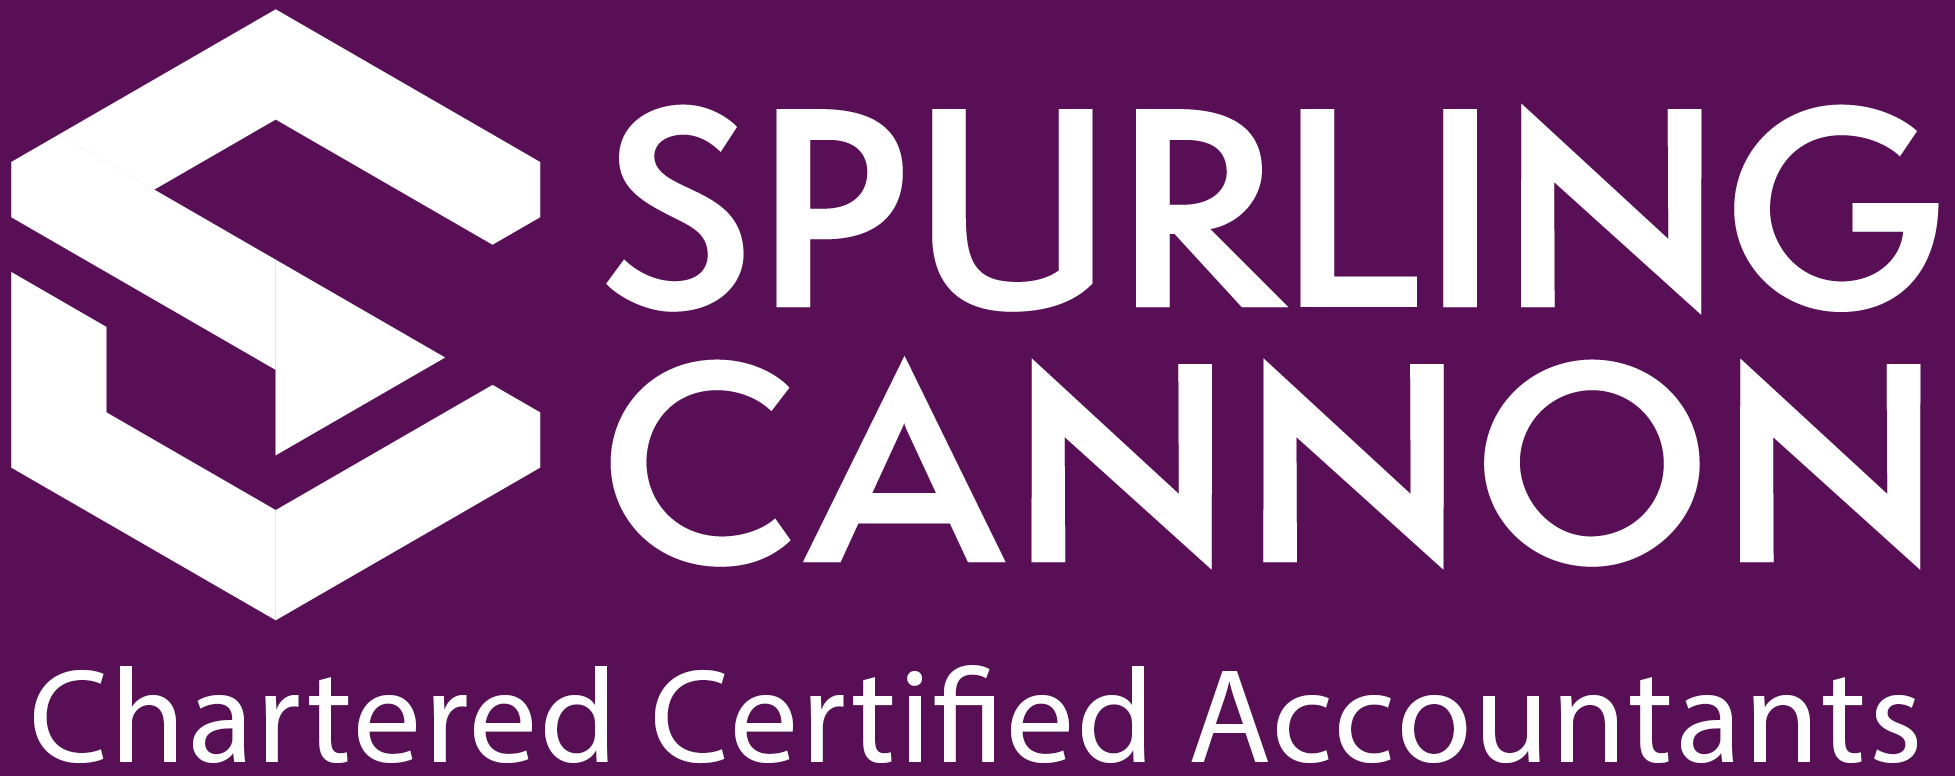 Spurling Cannon Certified Chartered Accountants In Kent